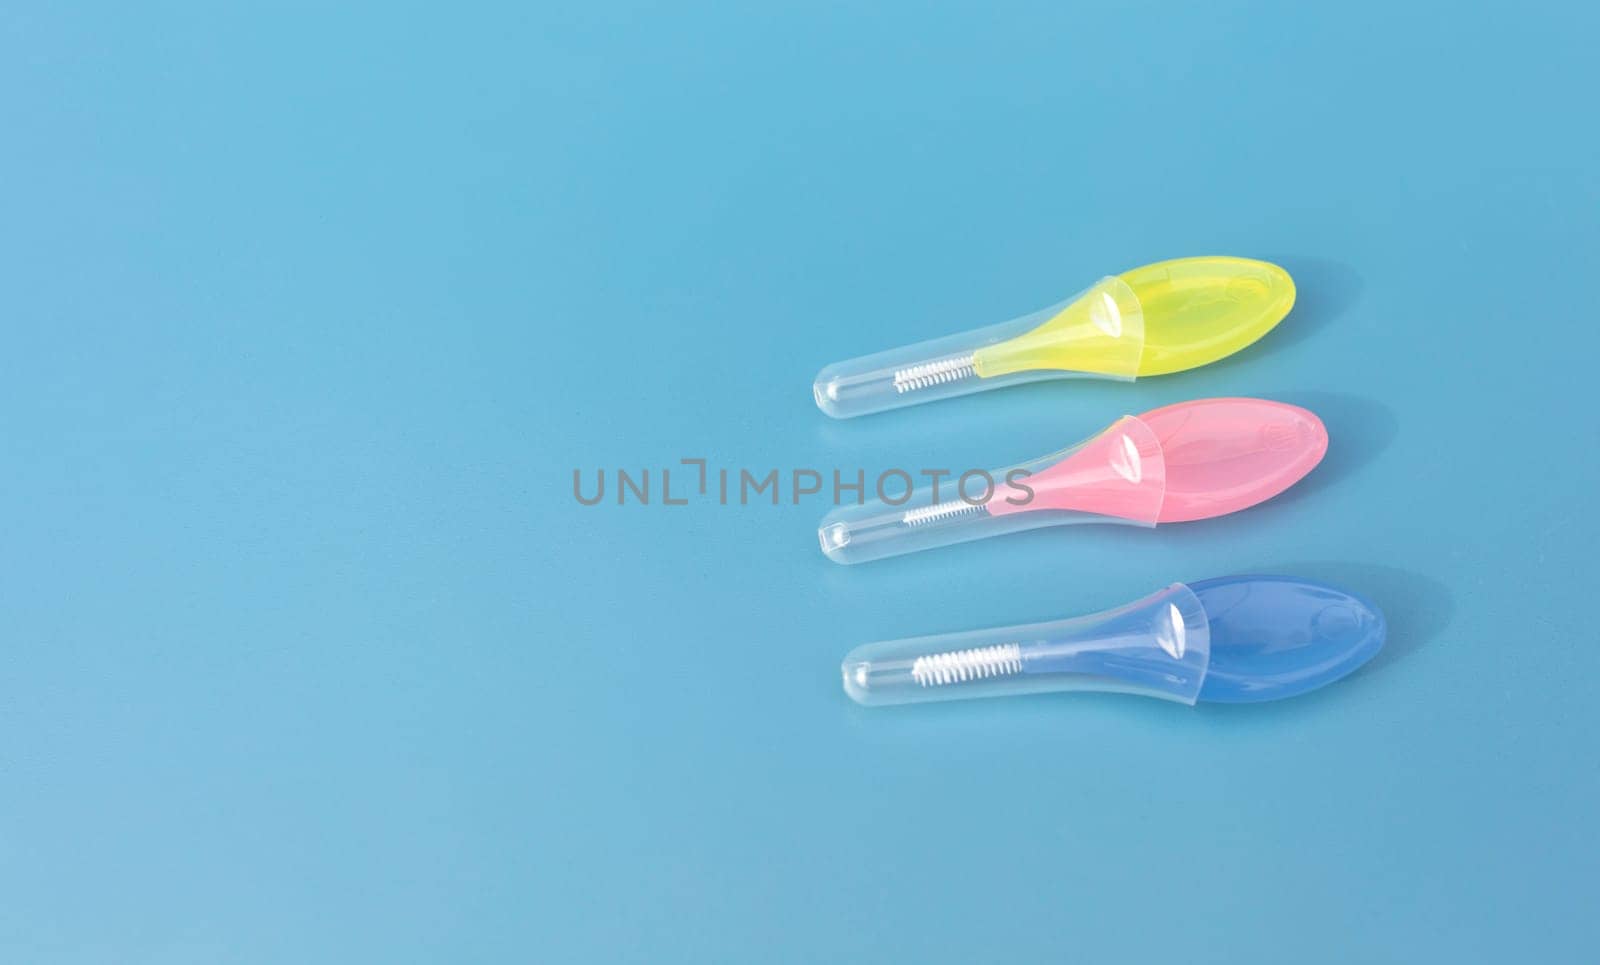 Mockup Colorful Interdental Toothbrush For Cleaning Between Teeth On Blue Background . Toothpick With Soft Bristles, Oral Tooth Cleaning Tool. Horizontal, Copy Space For Text. Dental And Orthodontic.